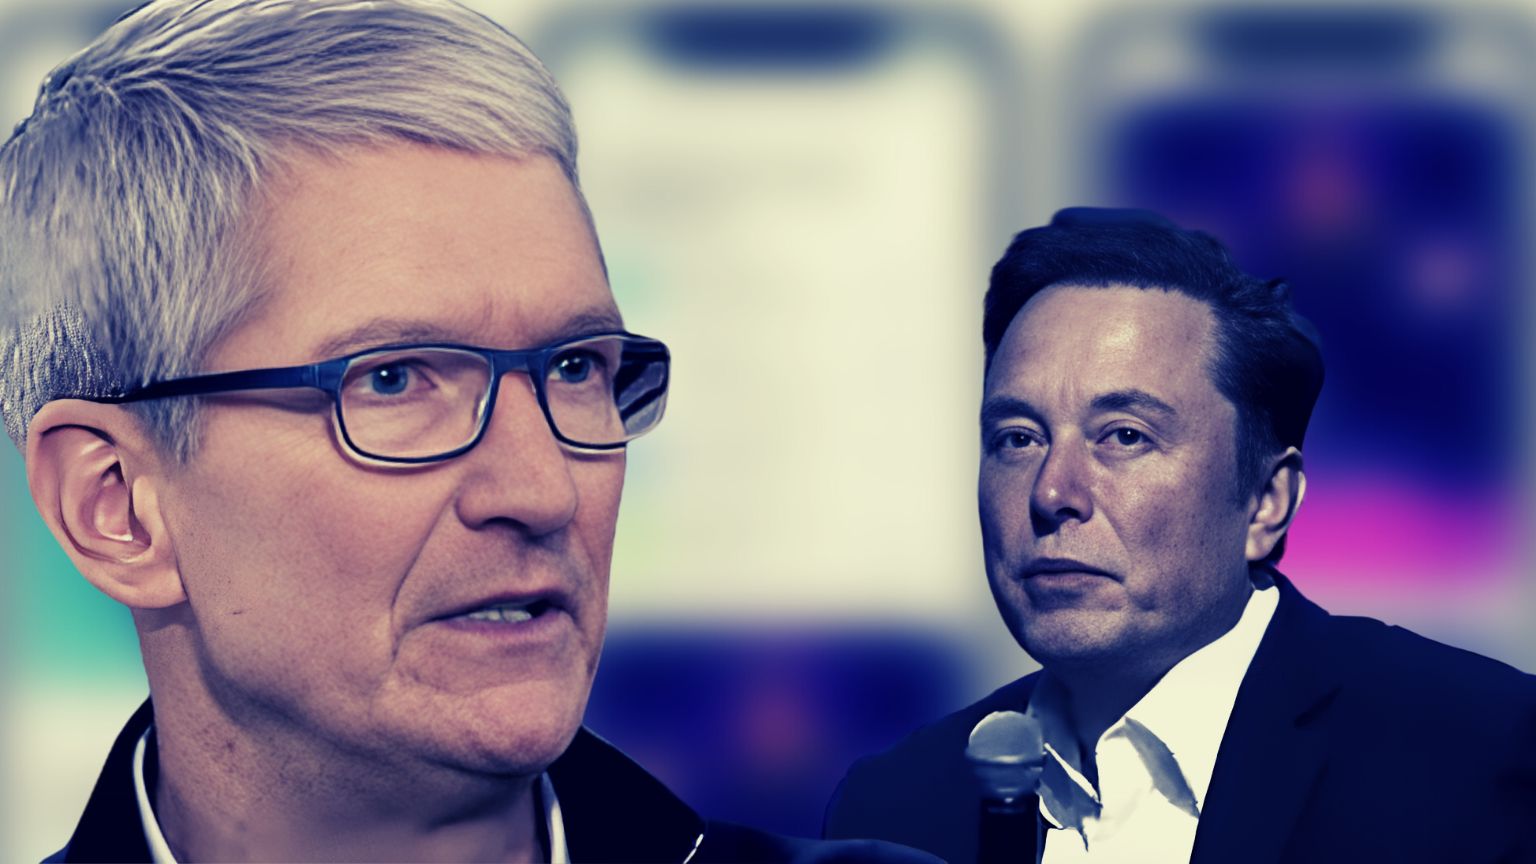 Tensions grow between Apple’s censorship practices and Elon Musk’s Twitter